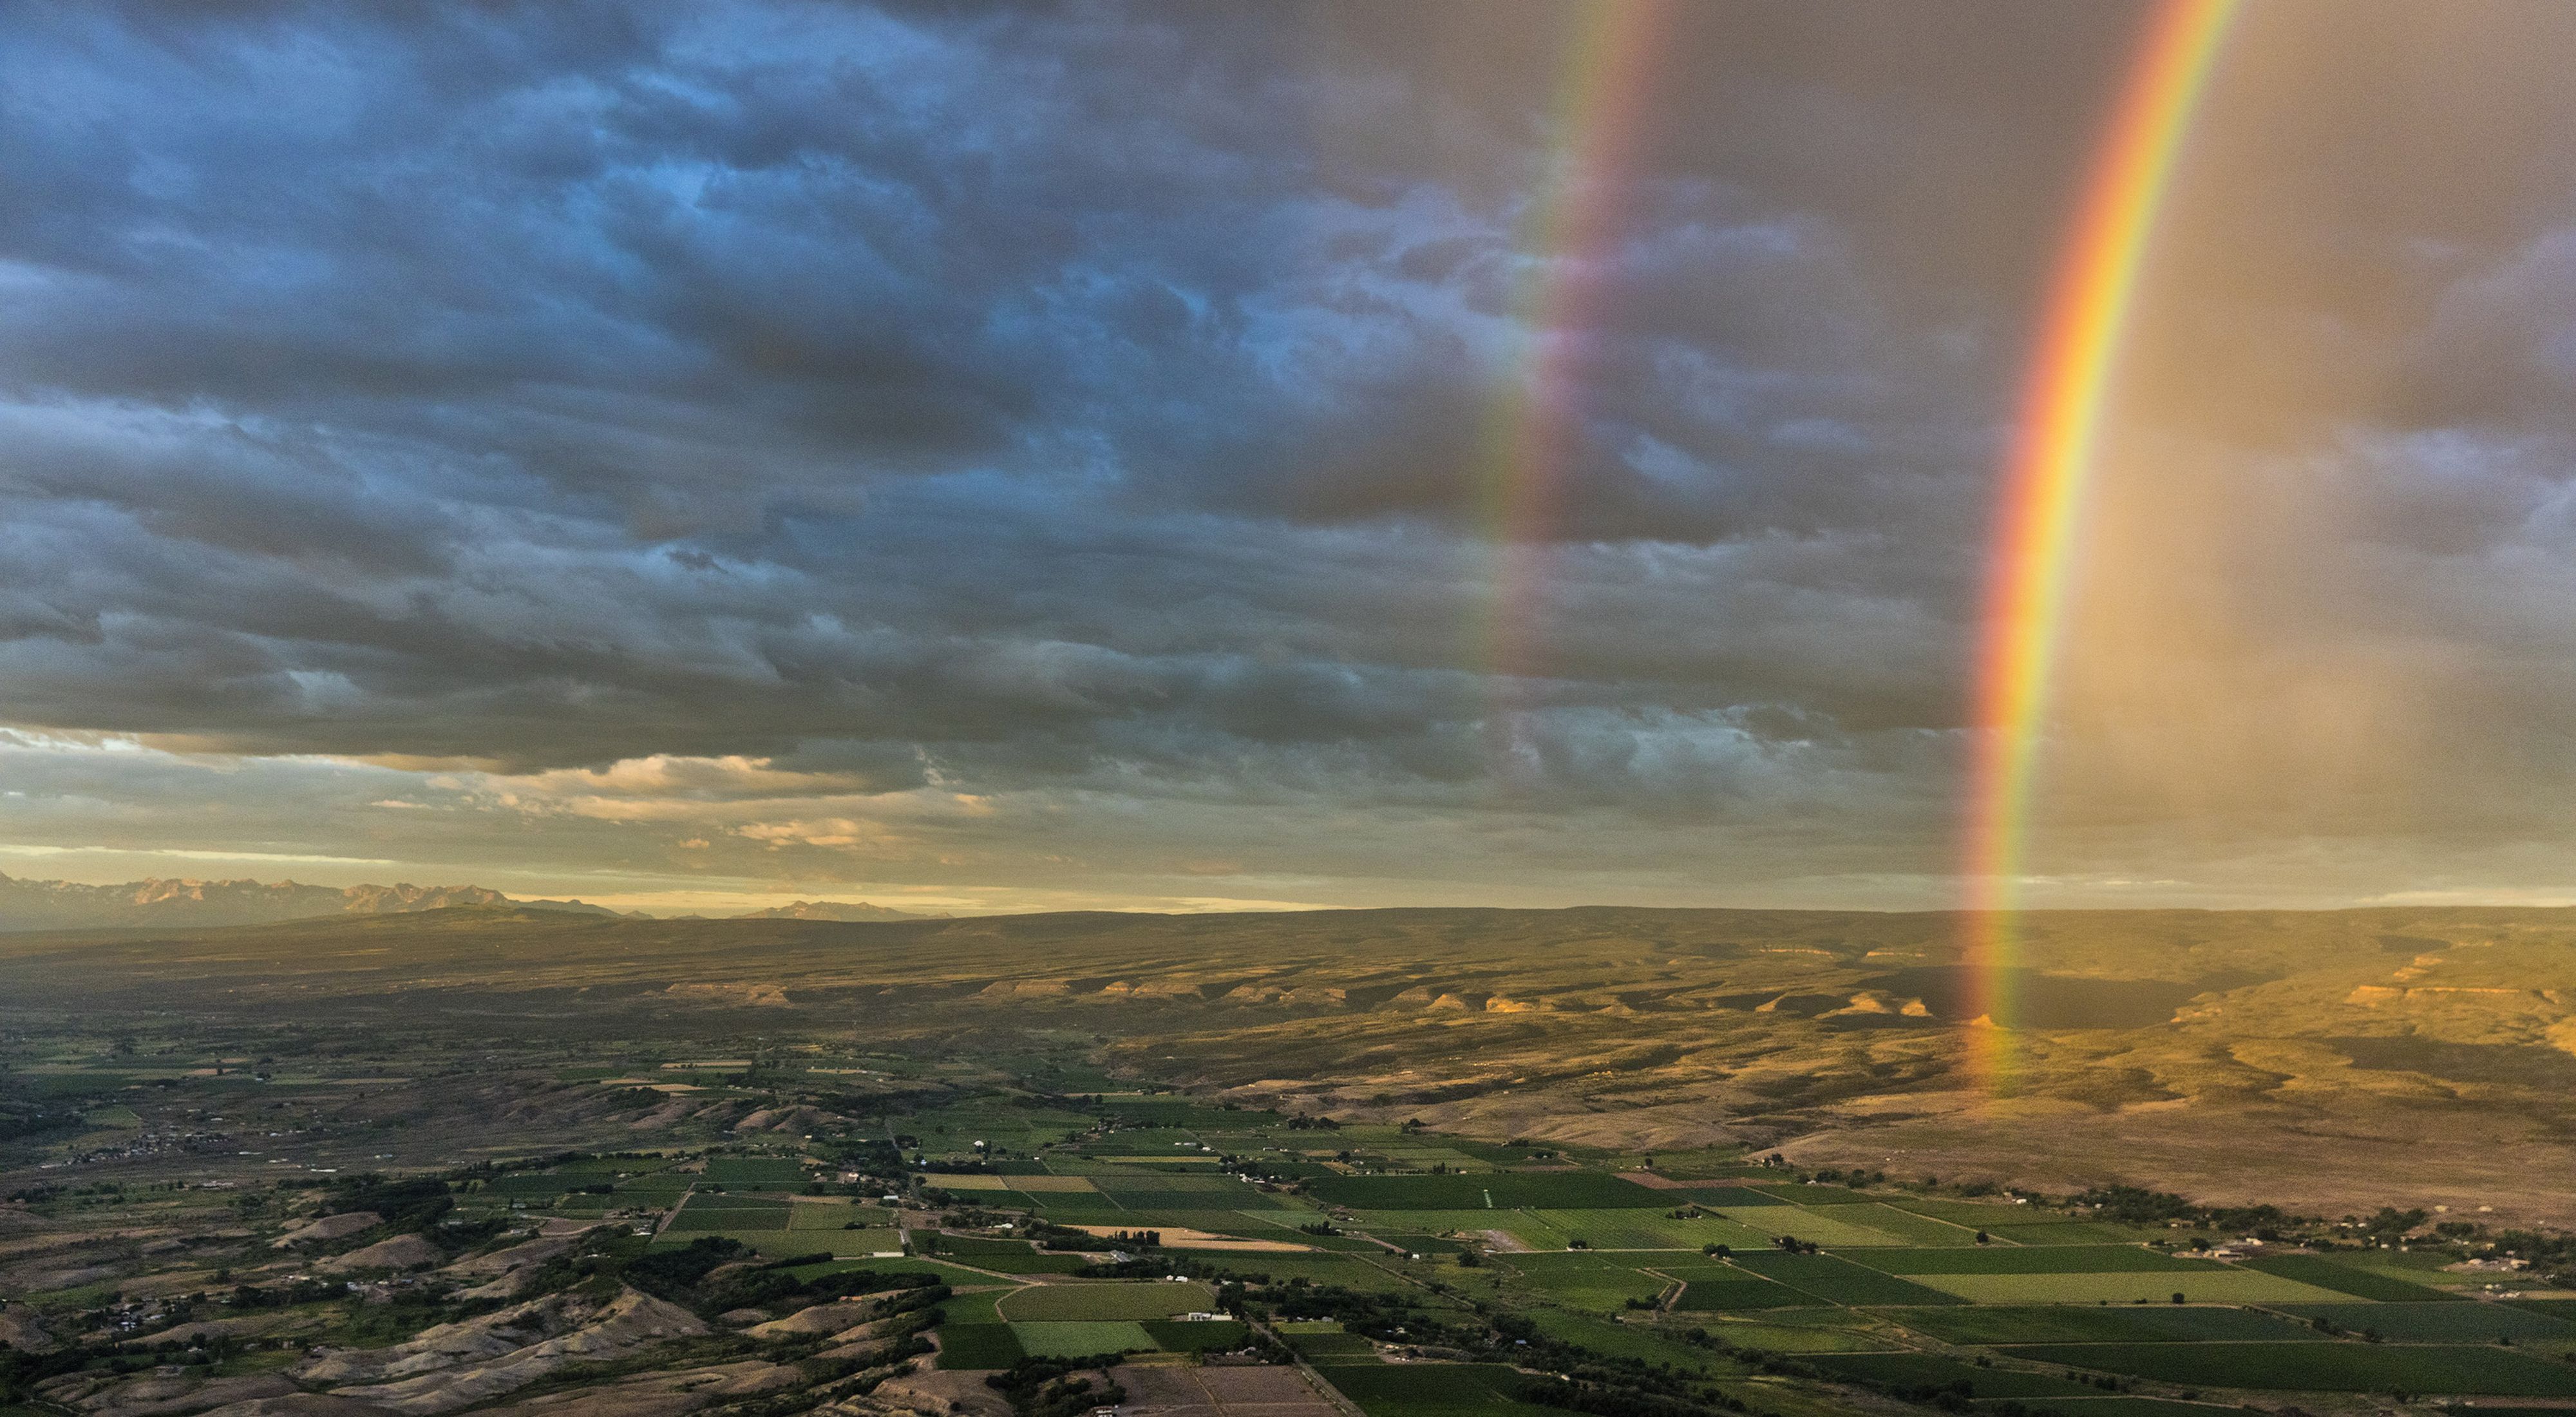 Aerial view of a vast landscape of agricultural field, homes, hills, and mountains with a double rainbow appearing over the fields.